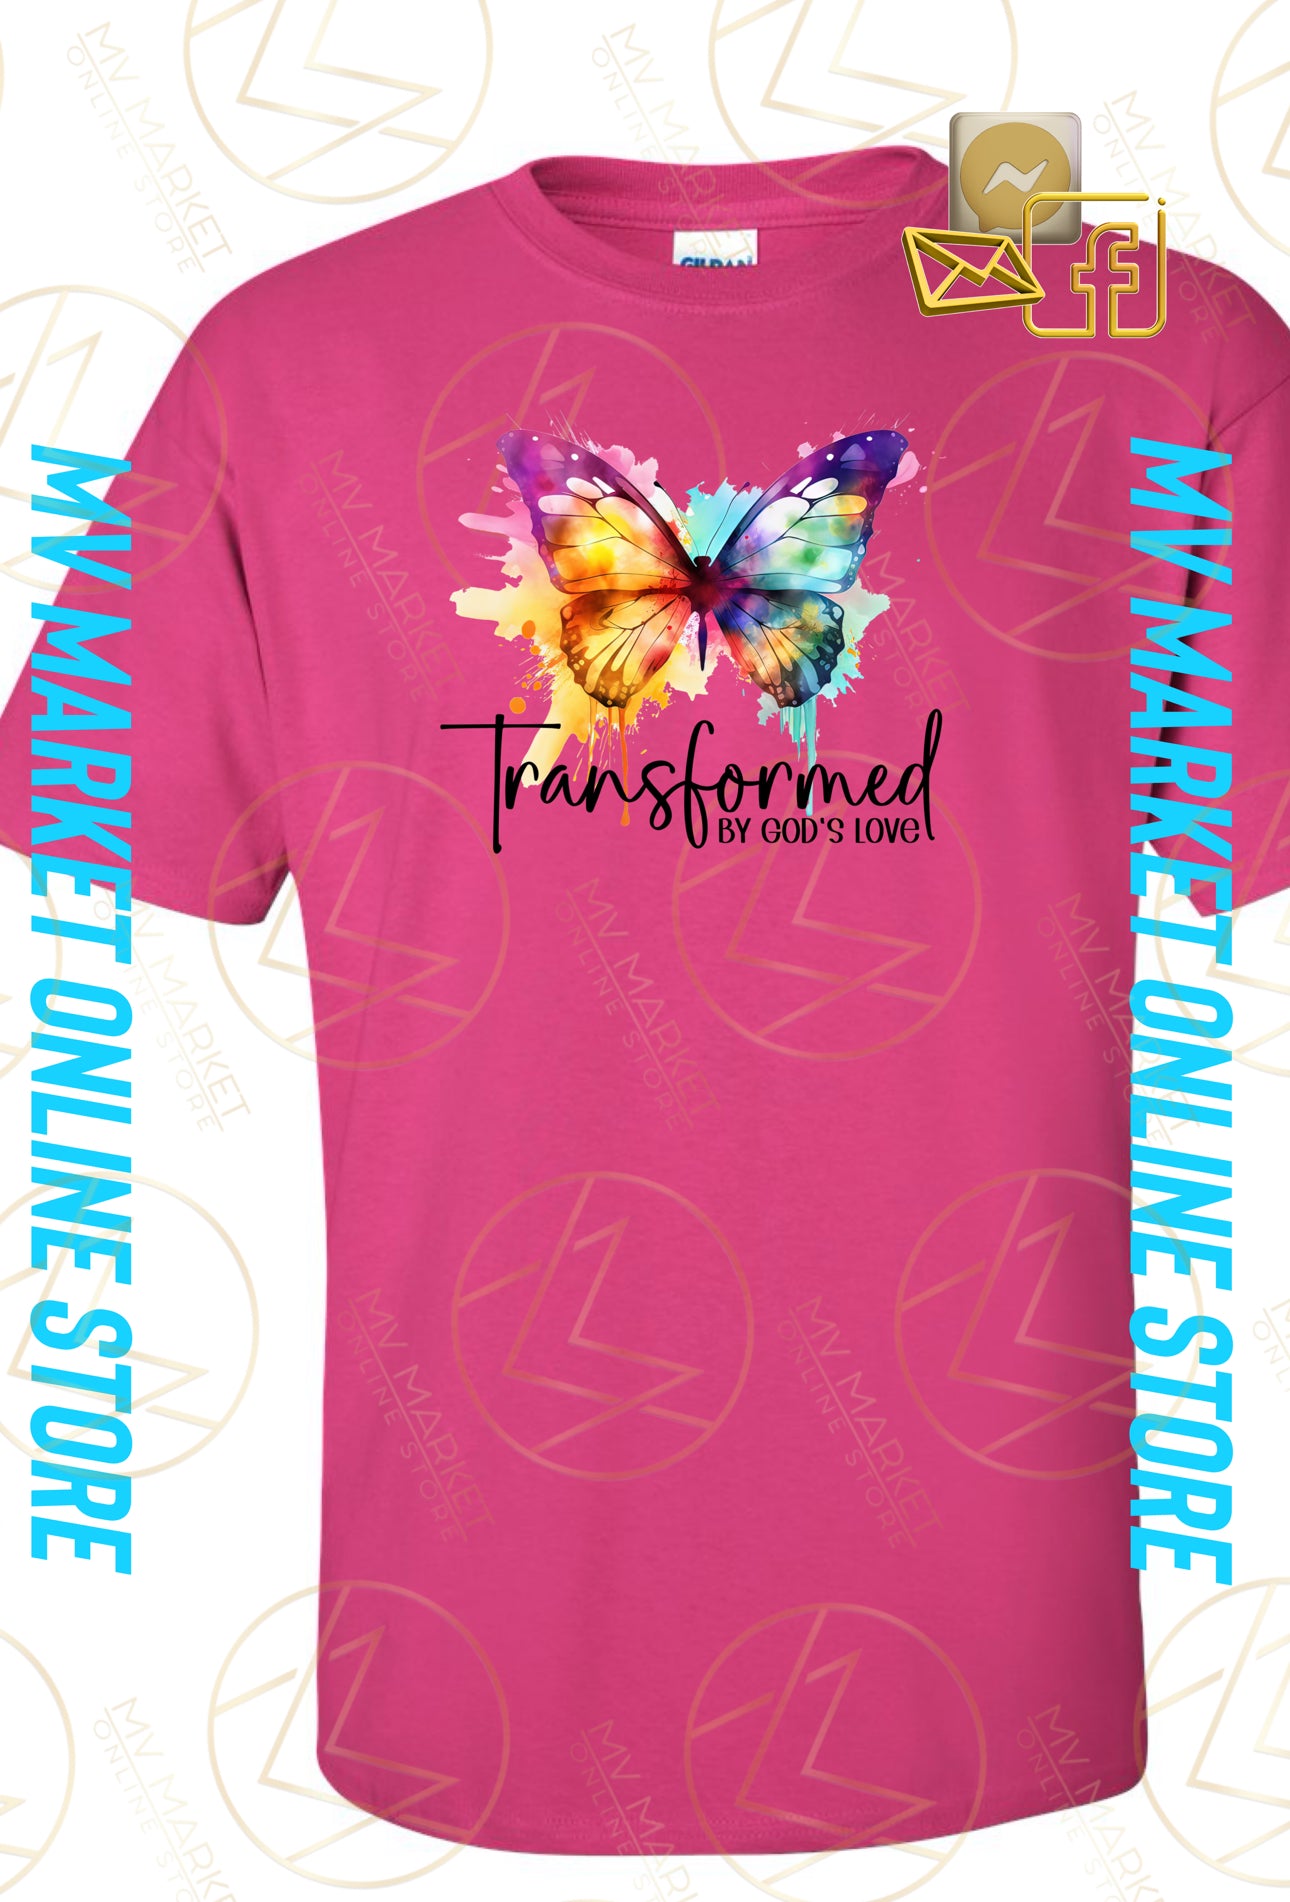 Transformed by God’s Love t-Shirts (Various Colors)